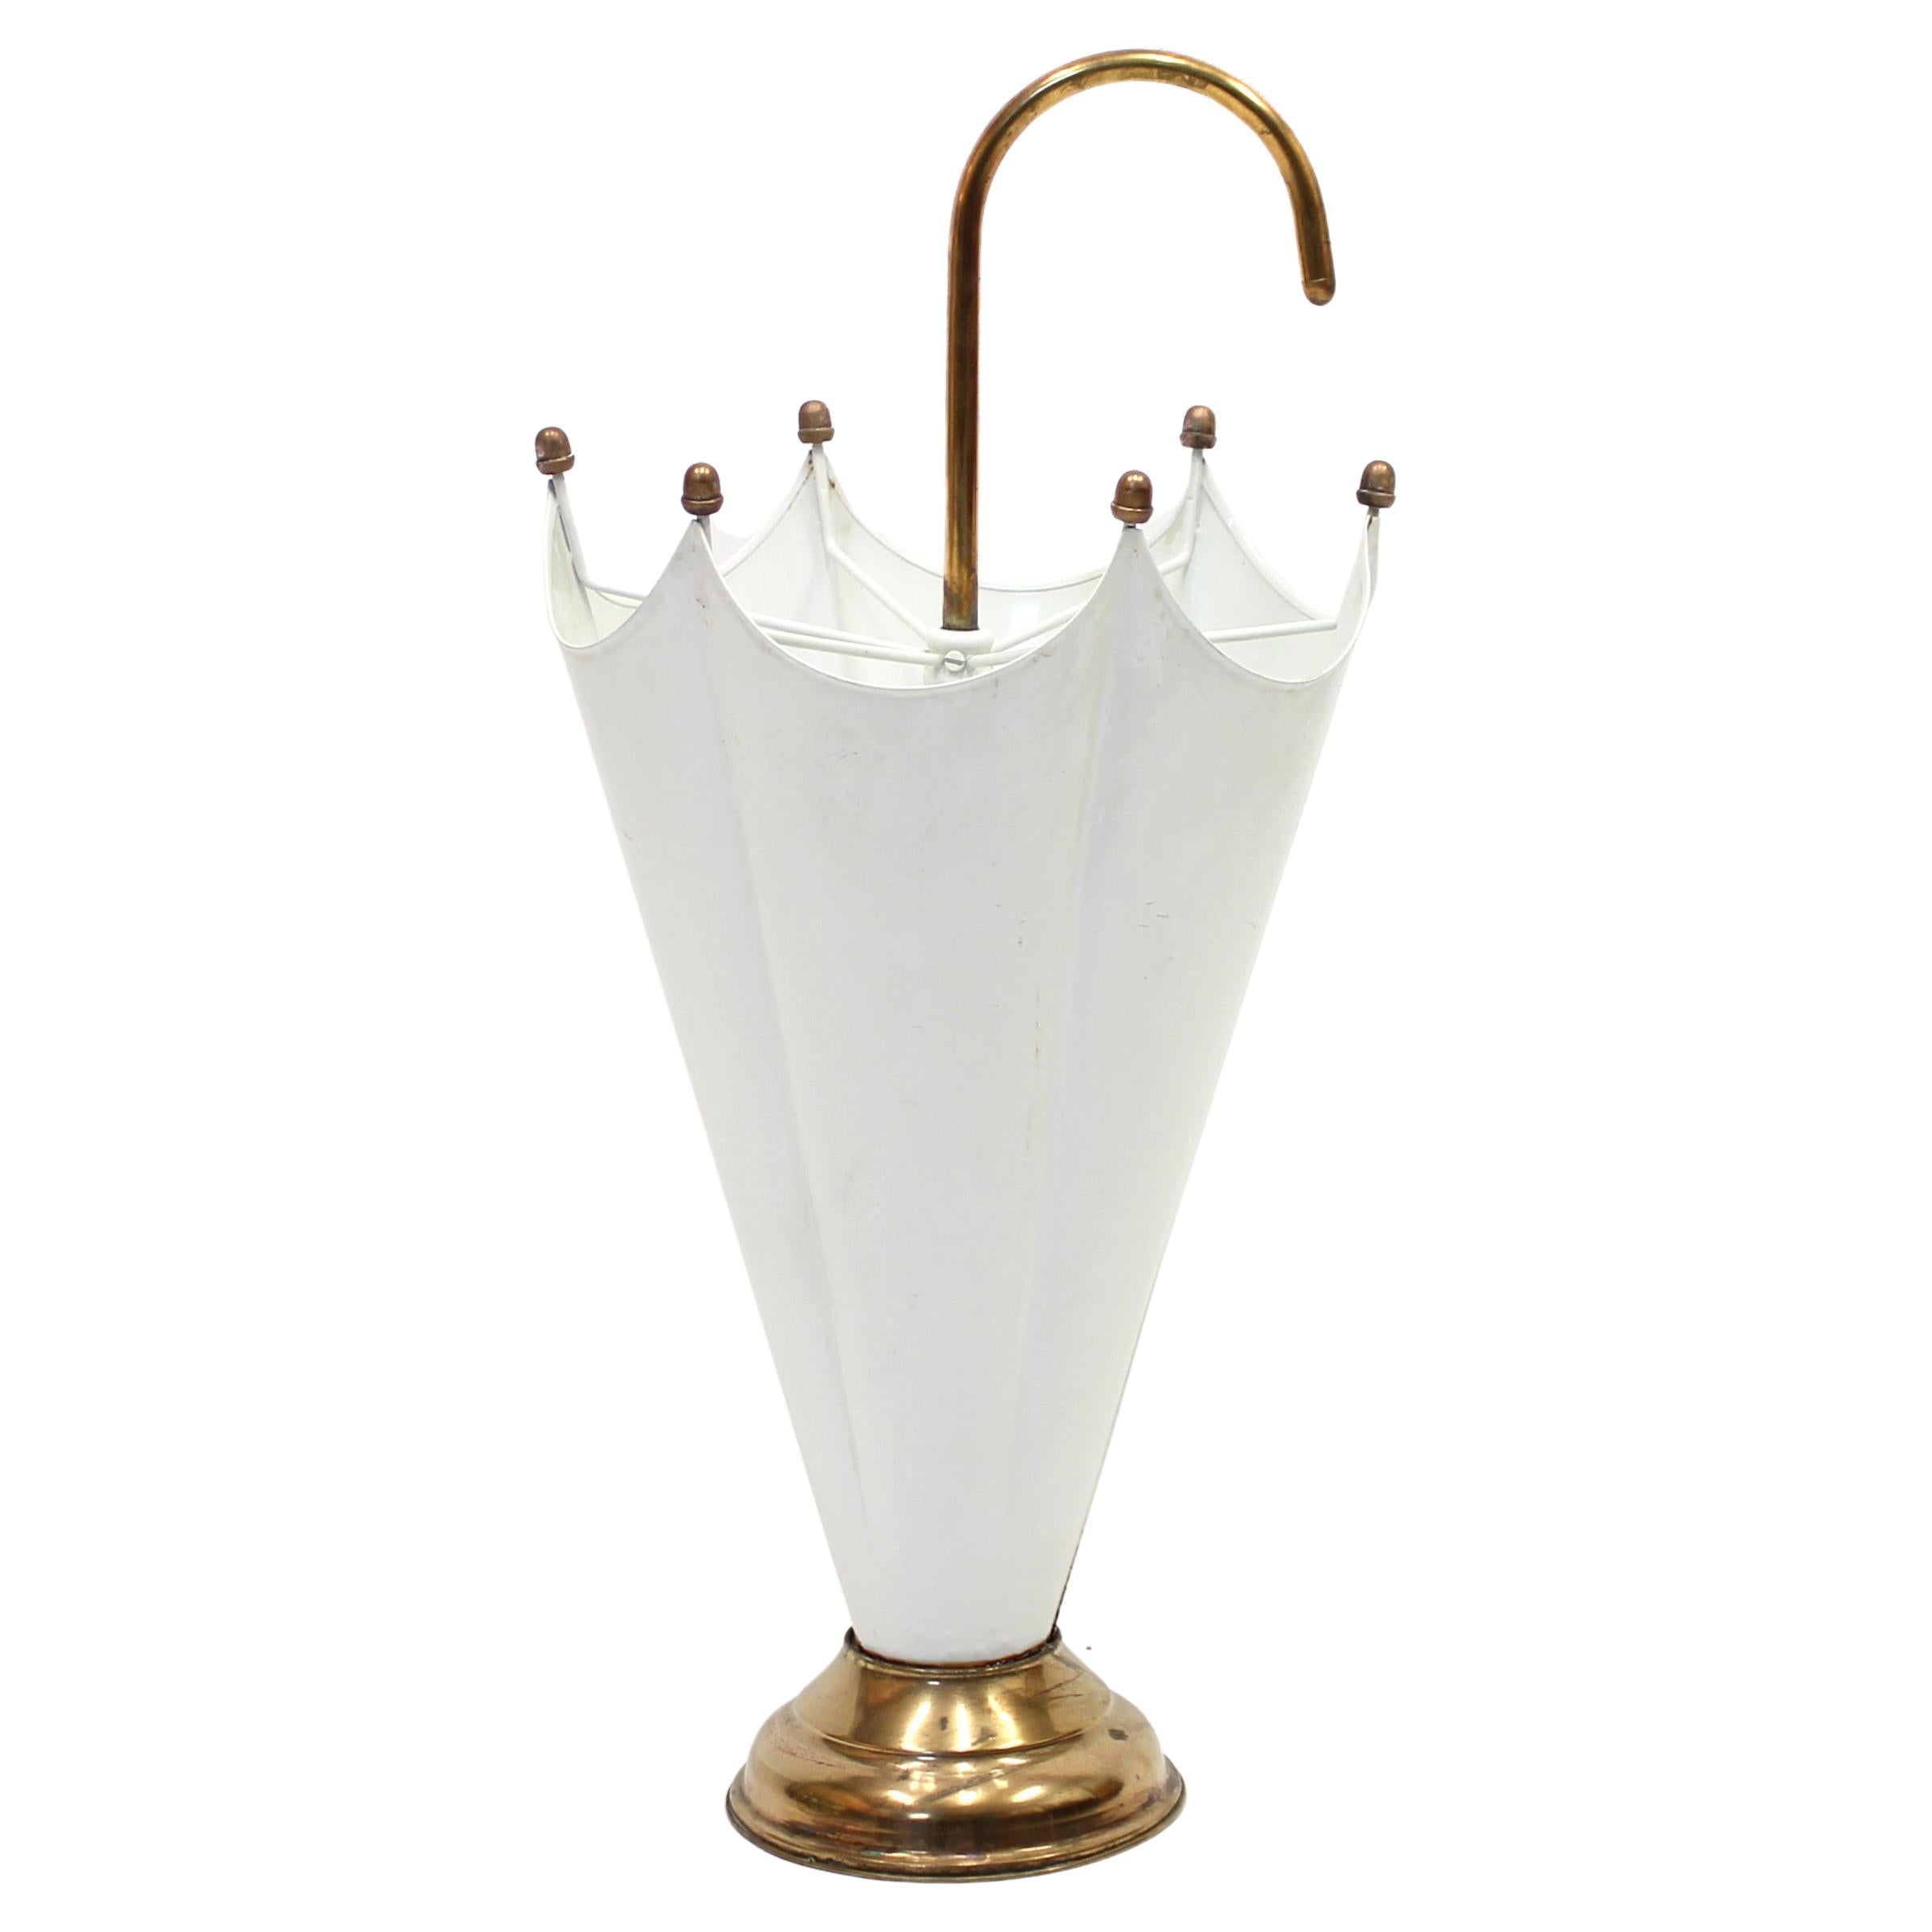 Cool umbrella stand in brass and white paint made i the 1970s. Possibly Italian. Base, handle and nobs i brass with the 